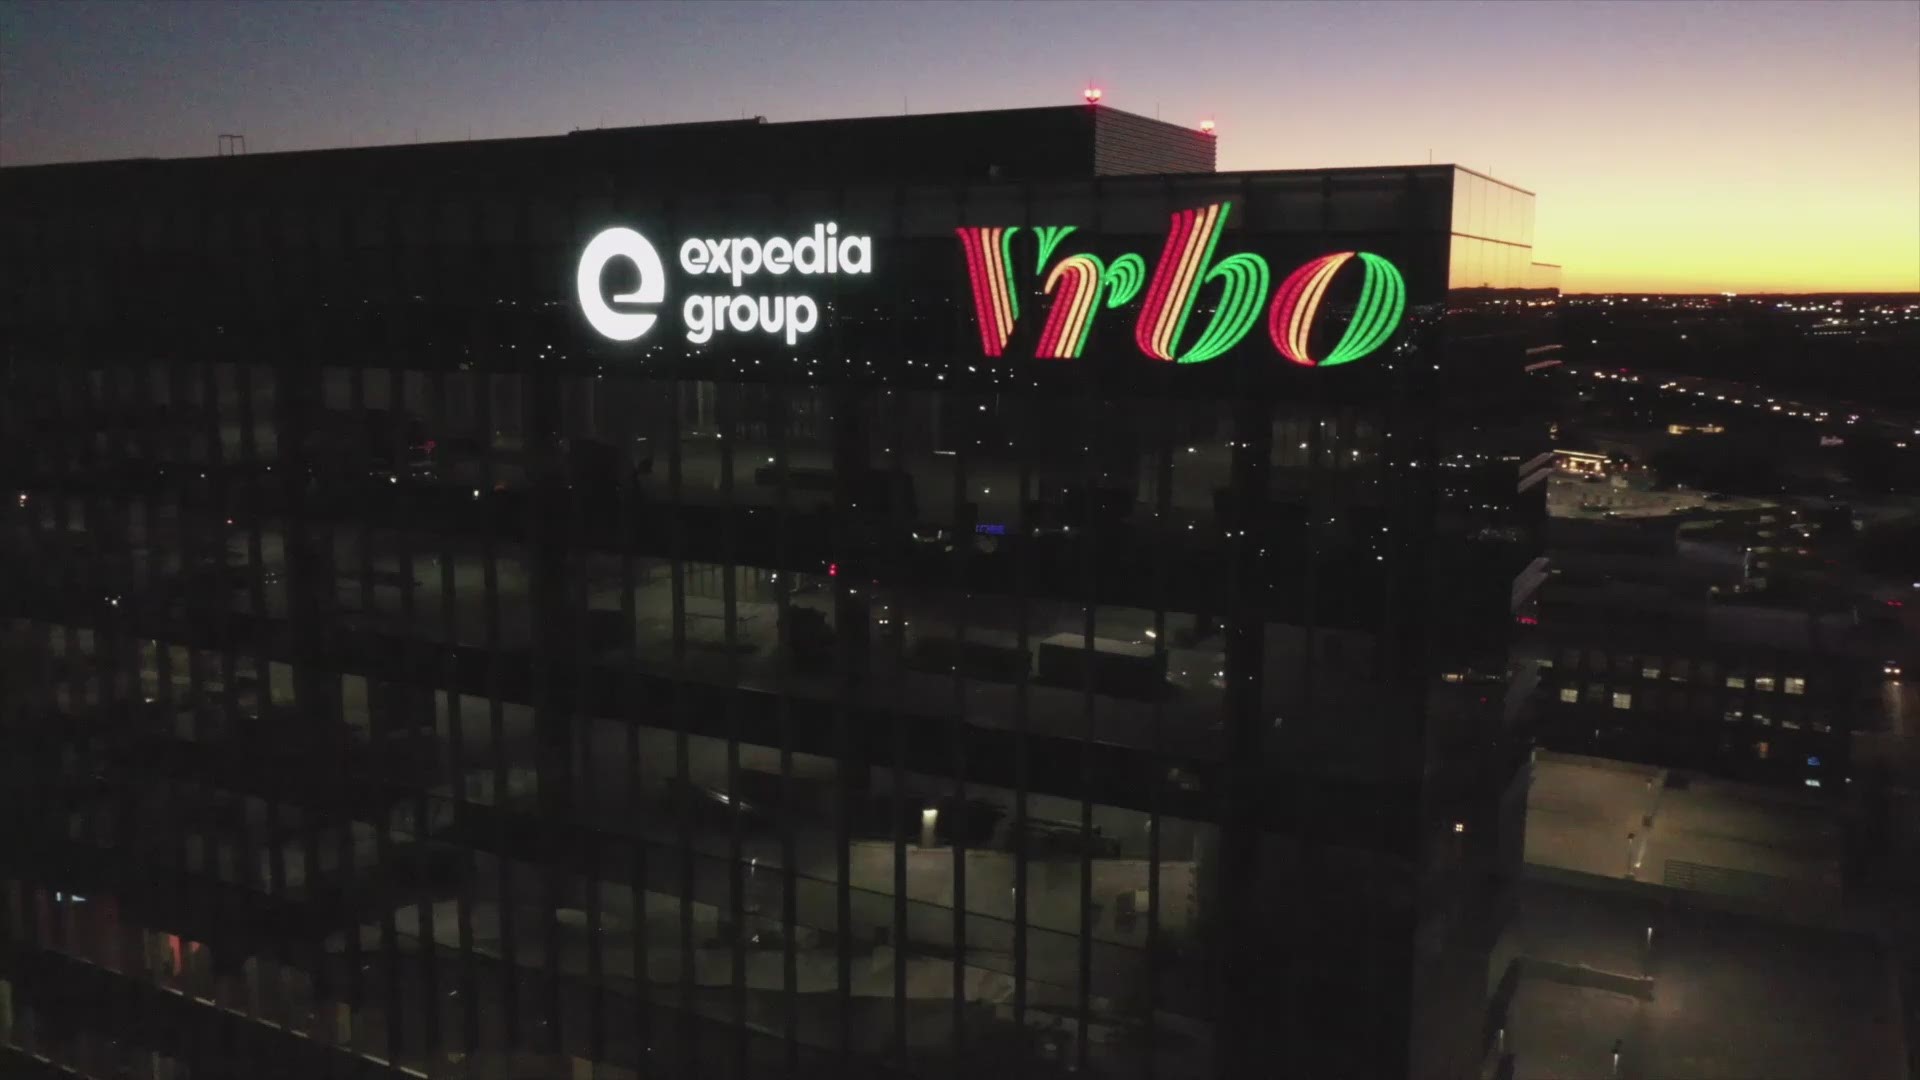 In celebration of Black History Month, Vrbo changed the colors of its logo displayed on its Domain offices to red, yellow and green instead of its usual white.